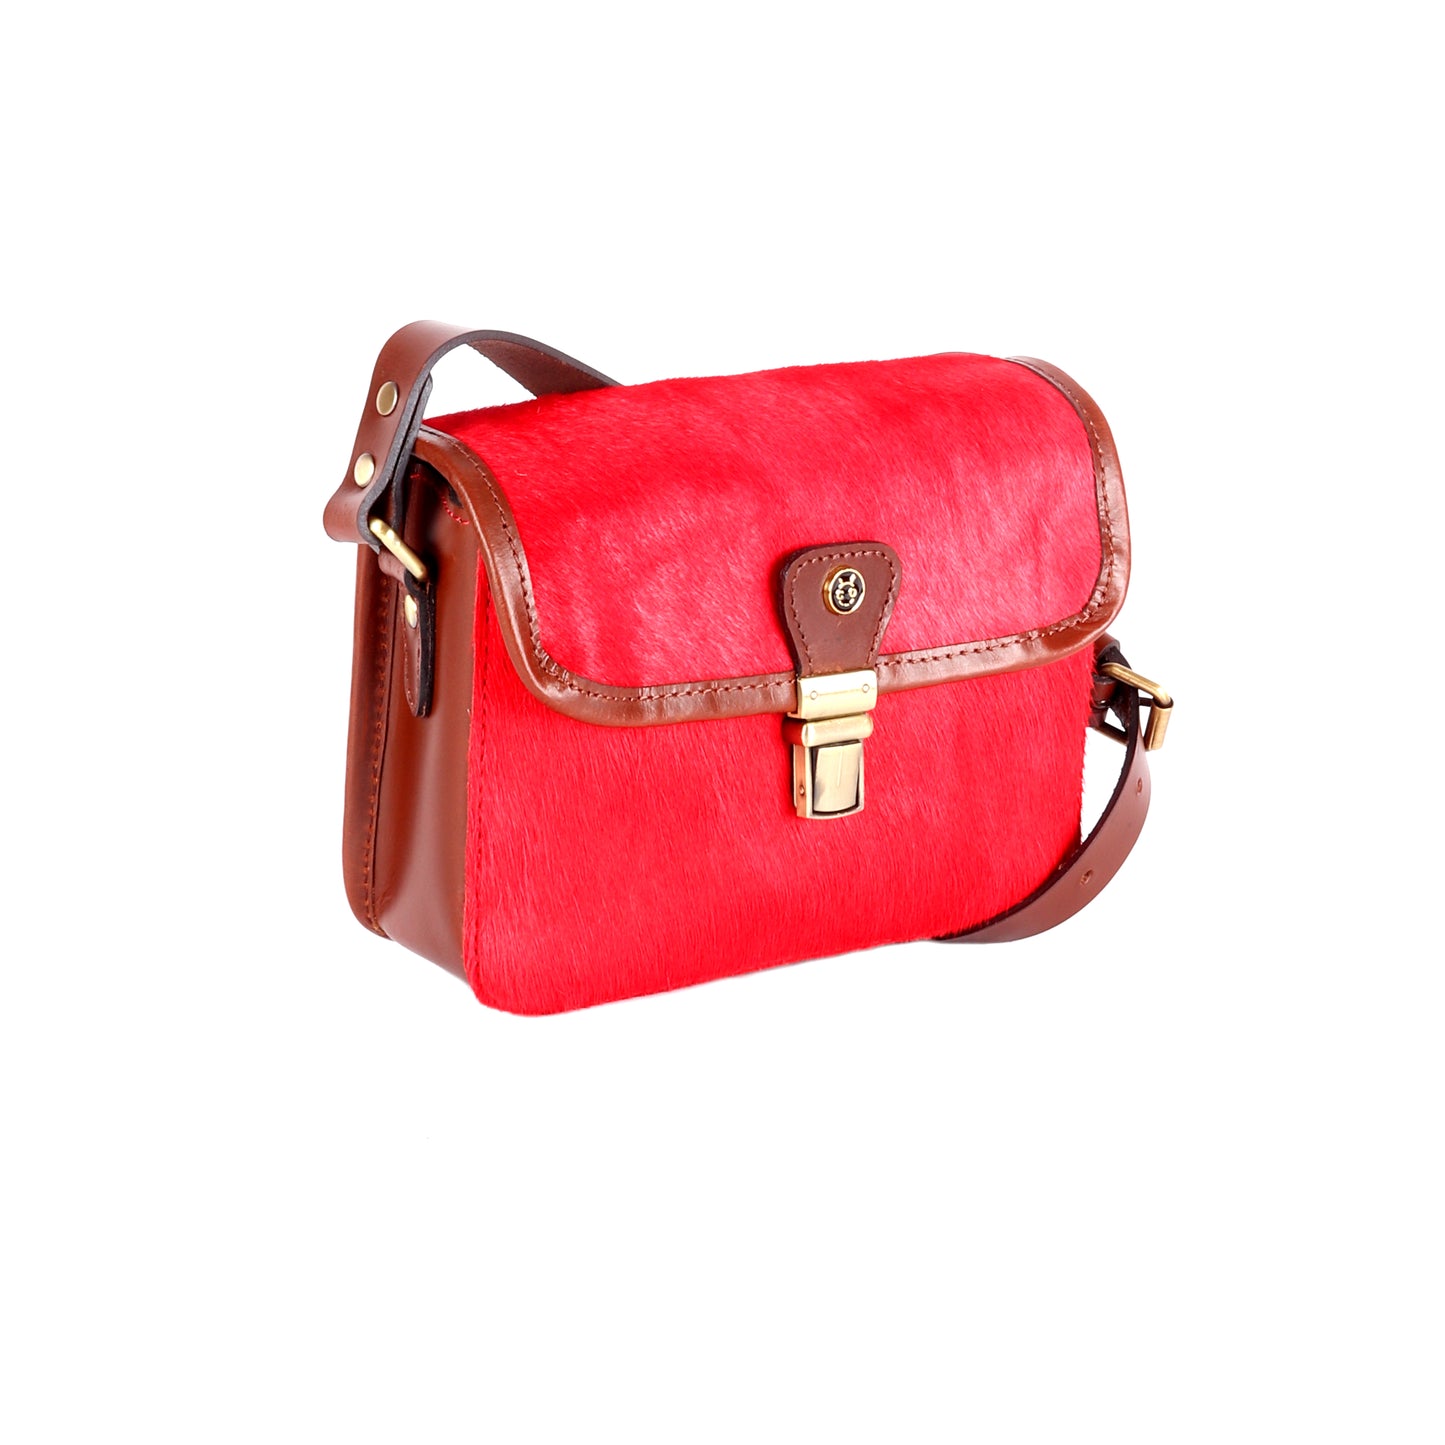 Martian Red Hair-On Leather Satchel